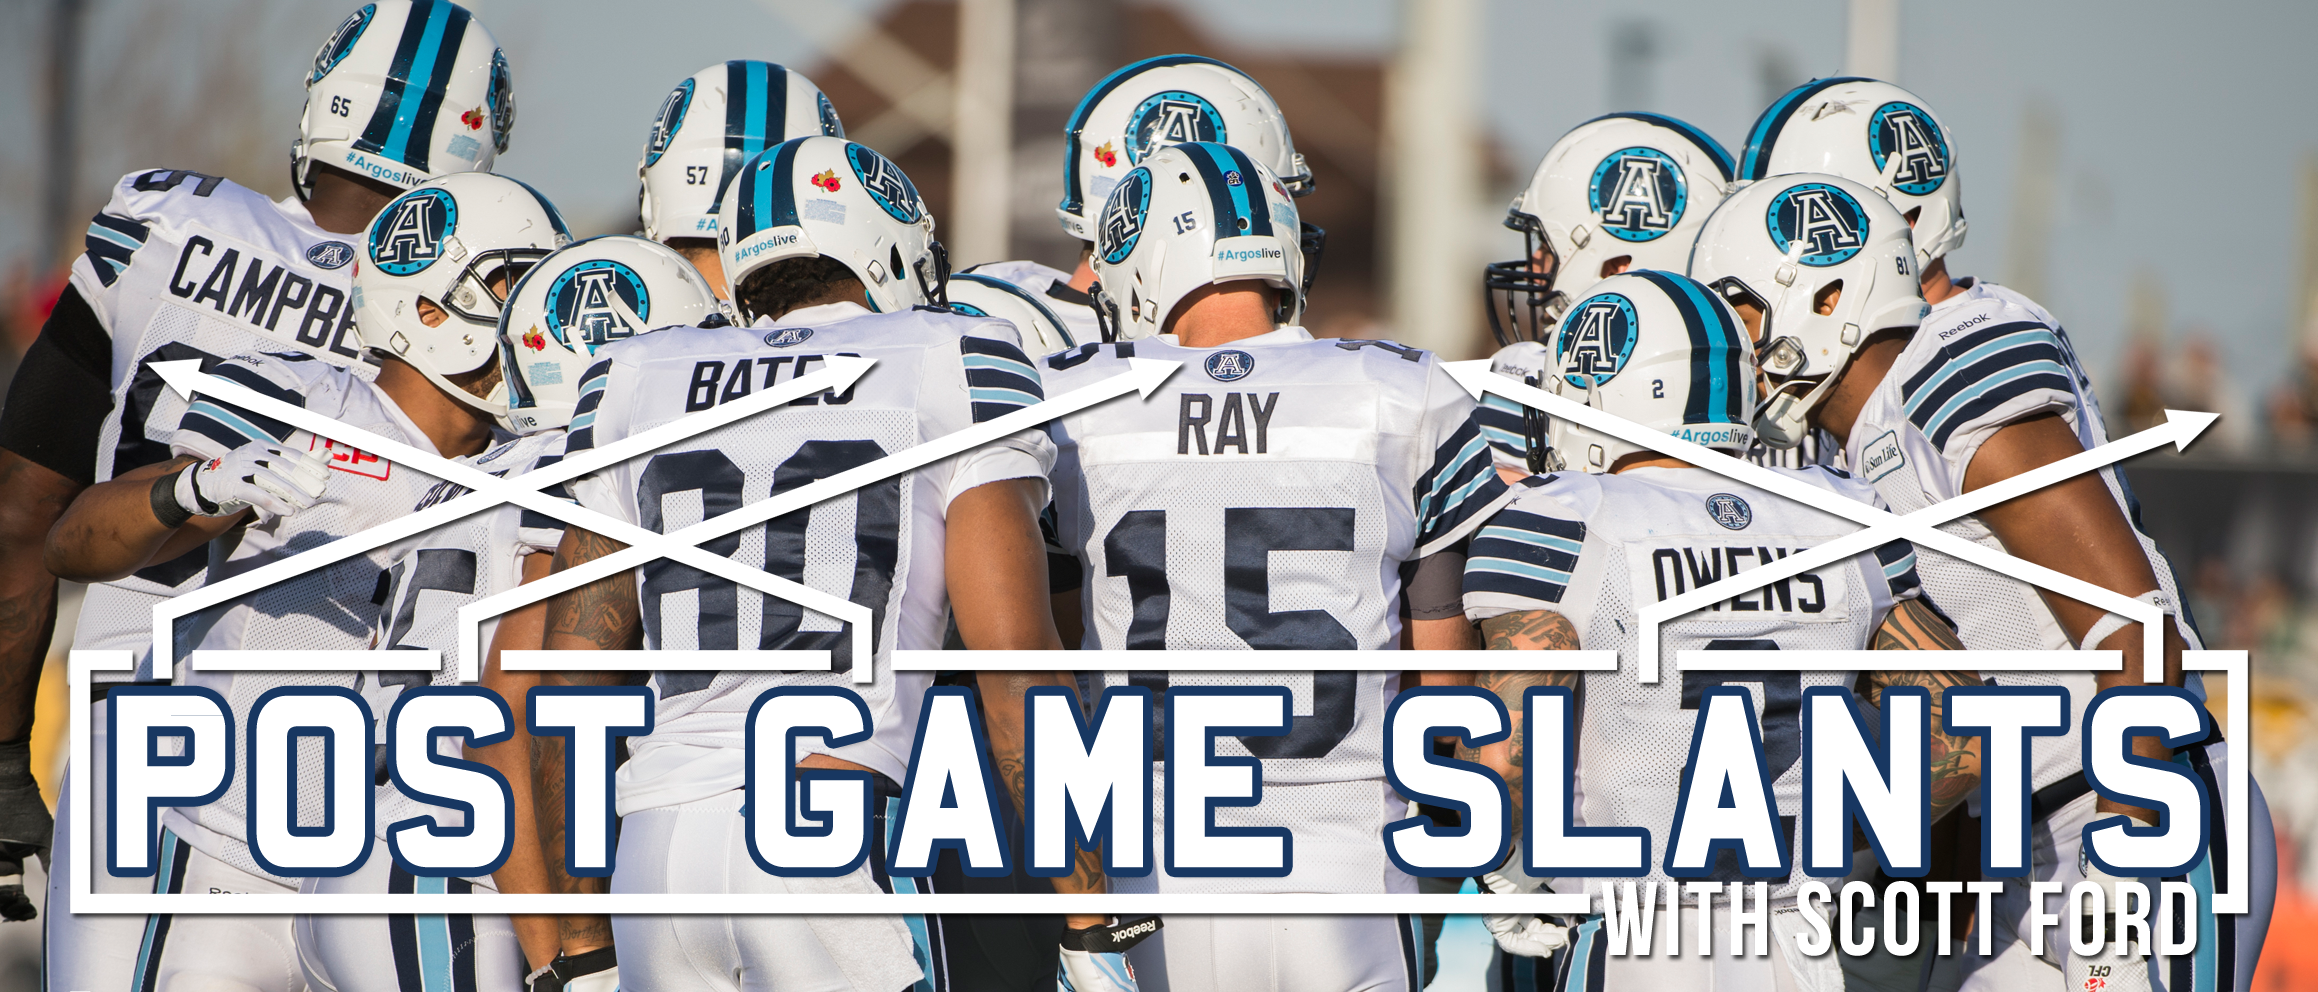 Post Game Slant’s: A Heart breaker closes the chapter on the 2015
Argos